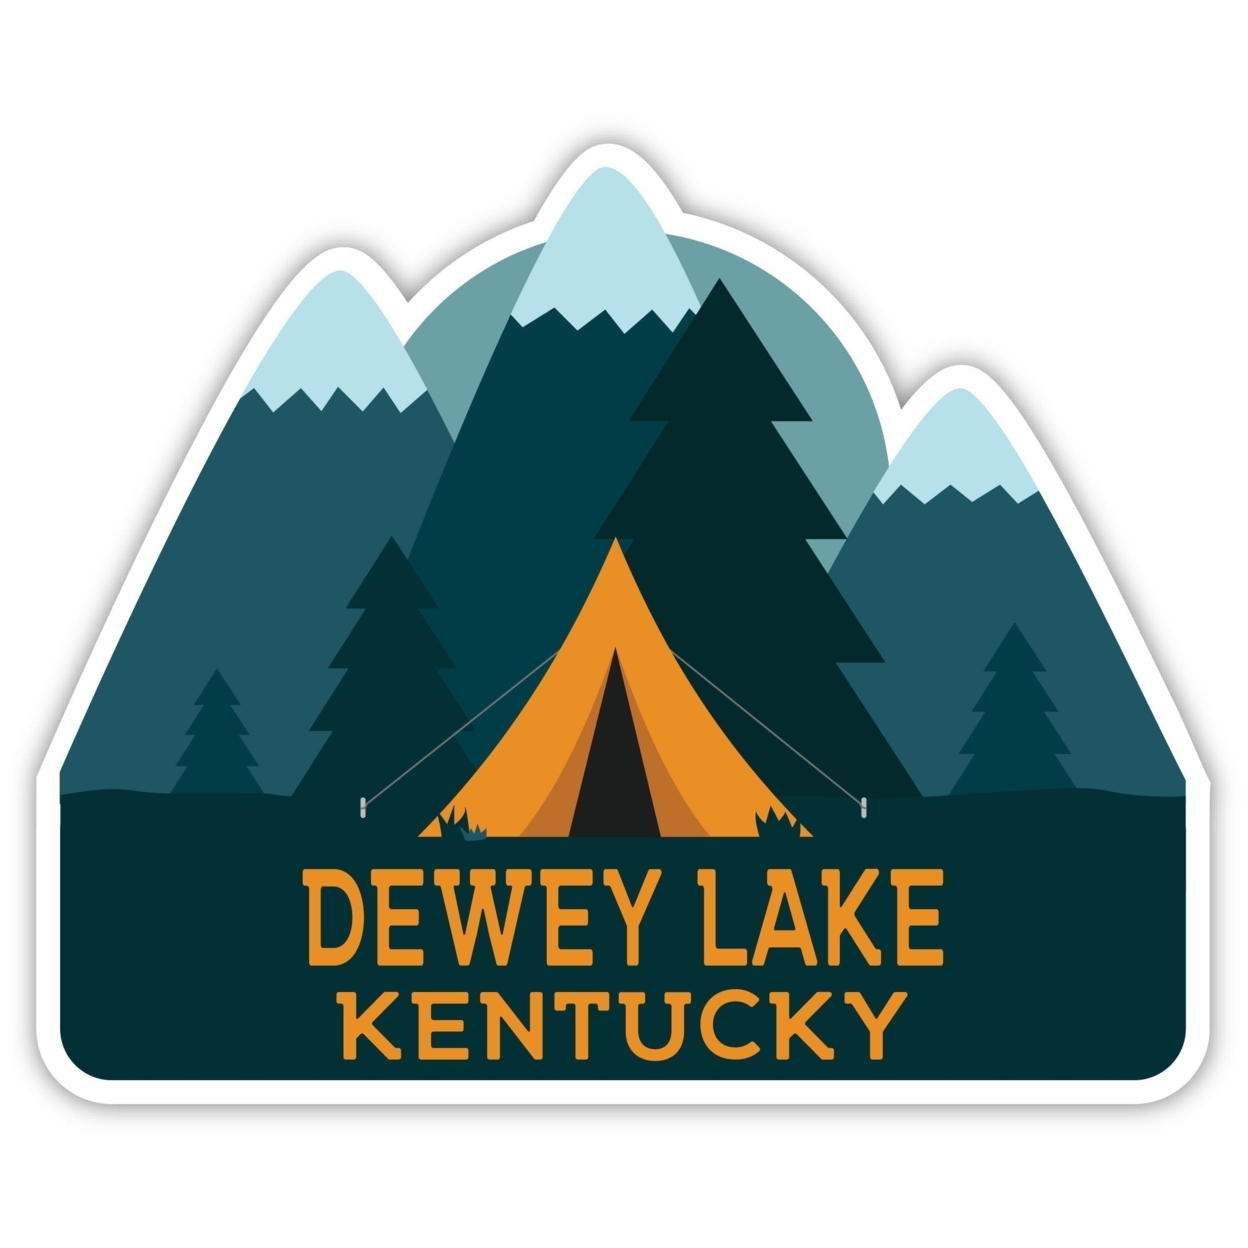 Dewey Lake Kentucky Souvenir Decorative Stickers (Choose Theme And Size) - 4-Pack, 10-Inch, Tent